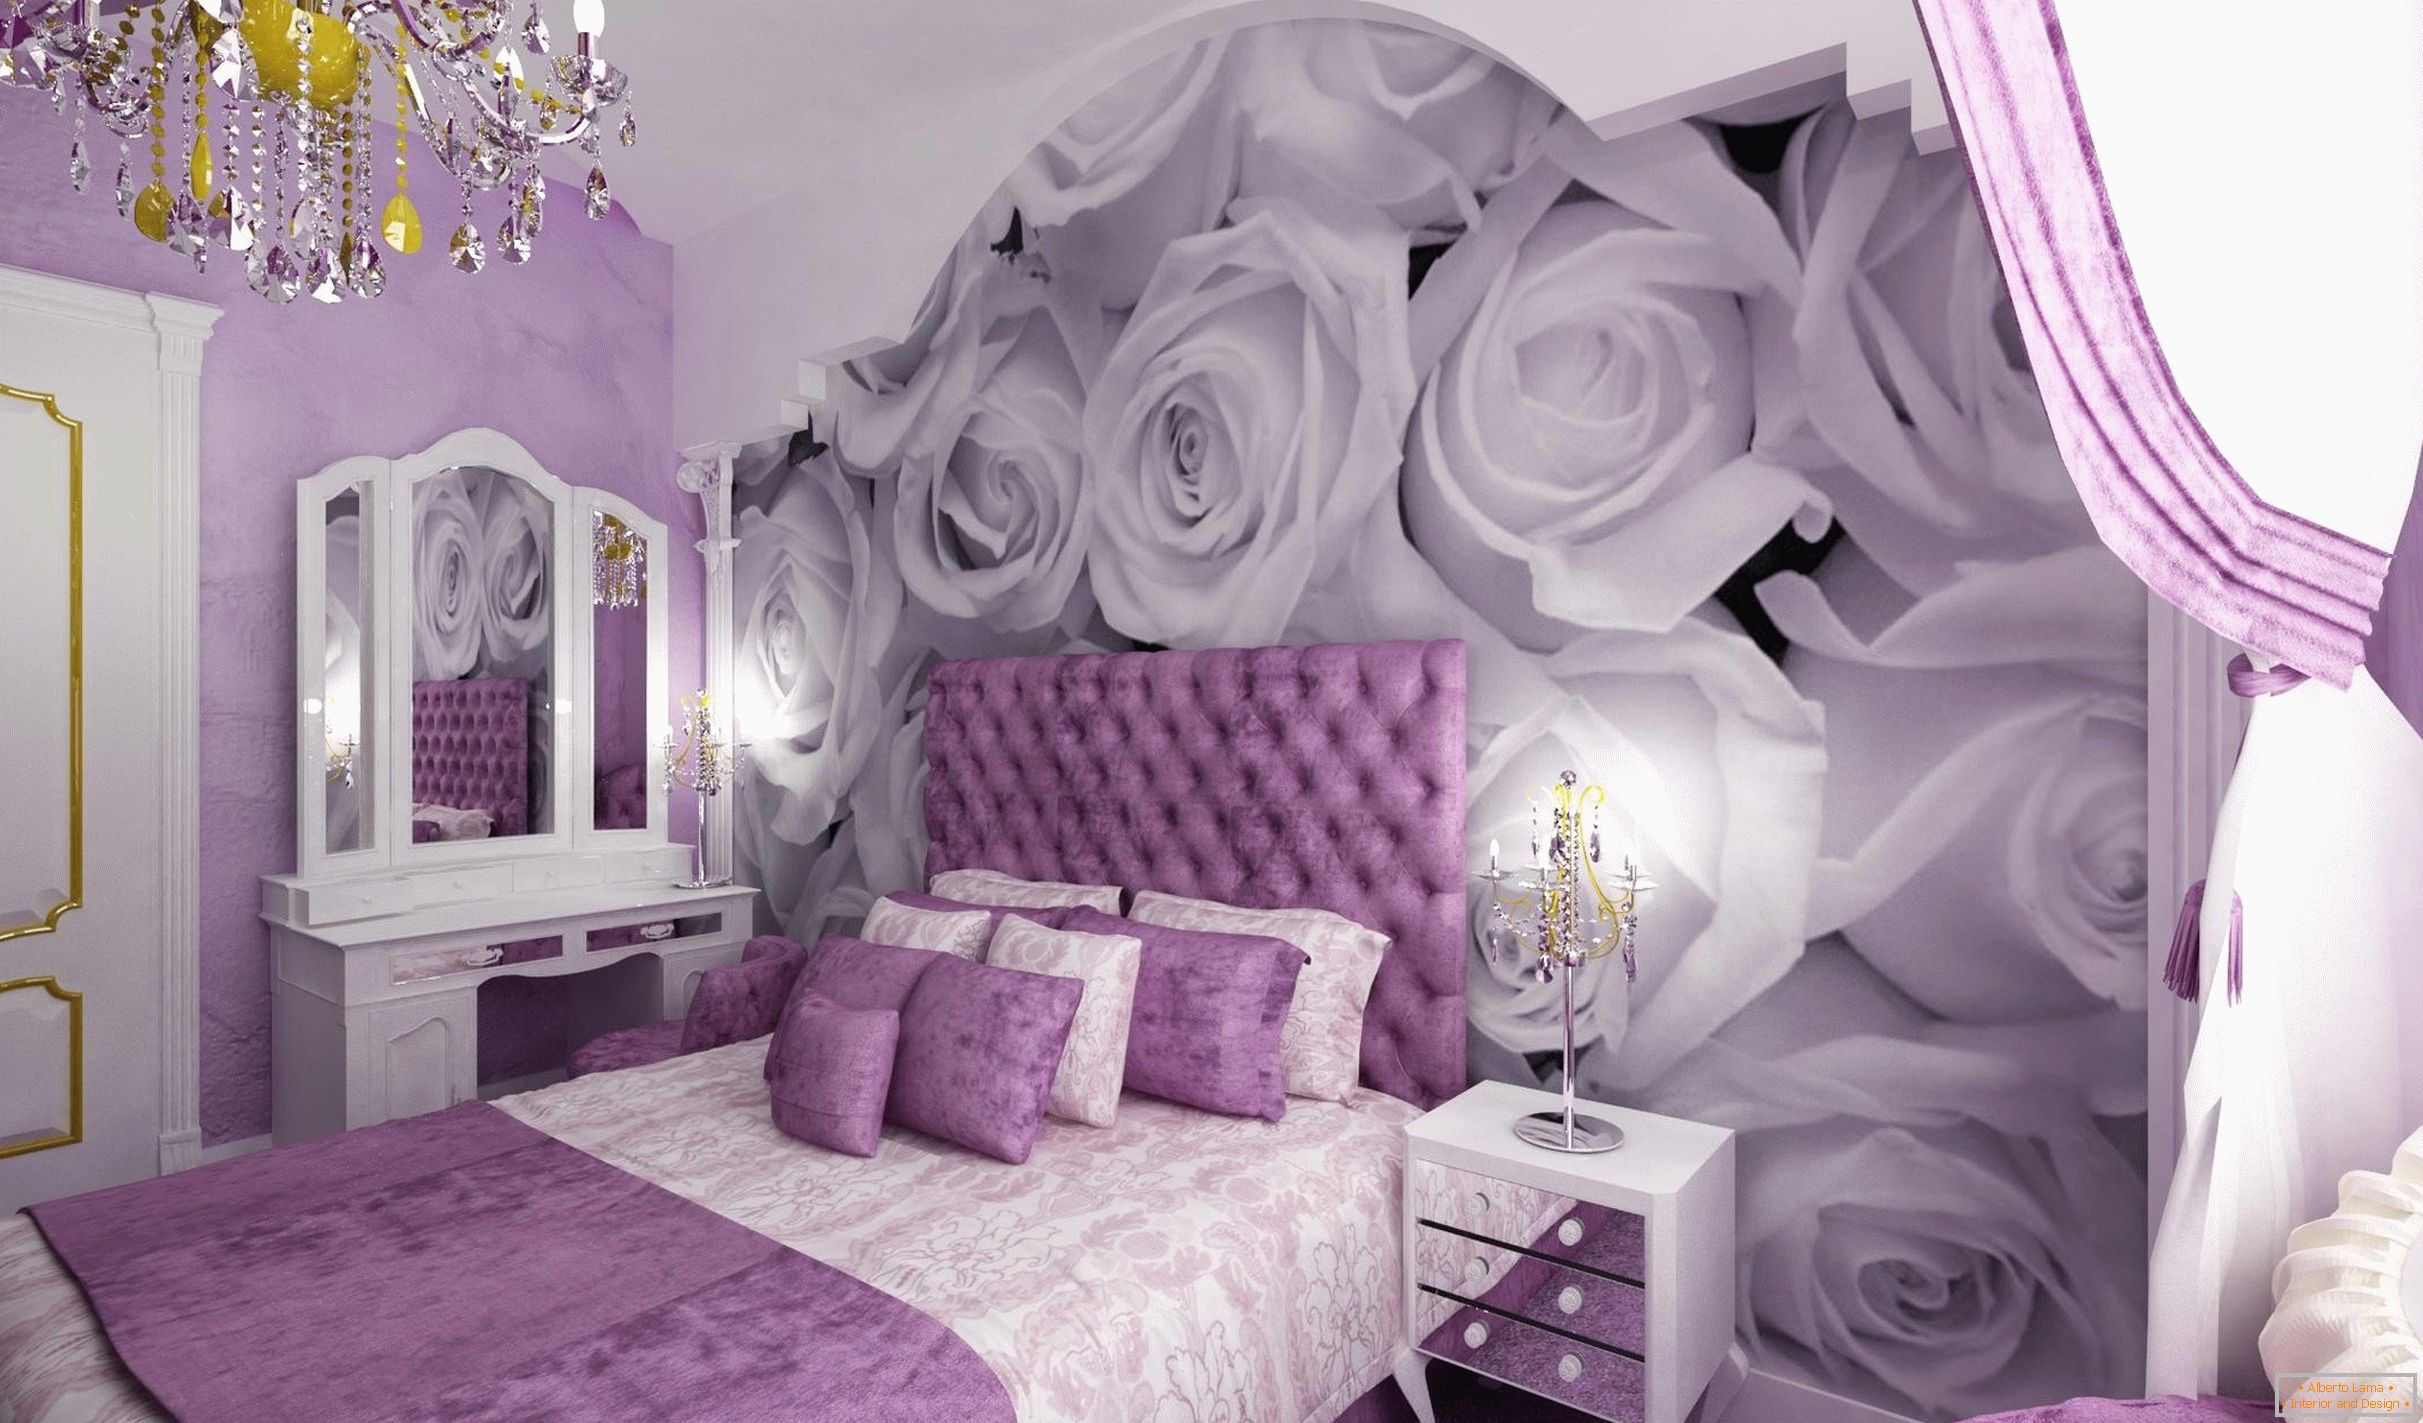 Roses on the bedroom wall